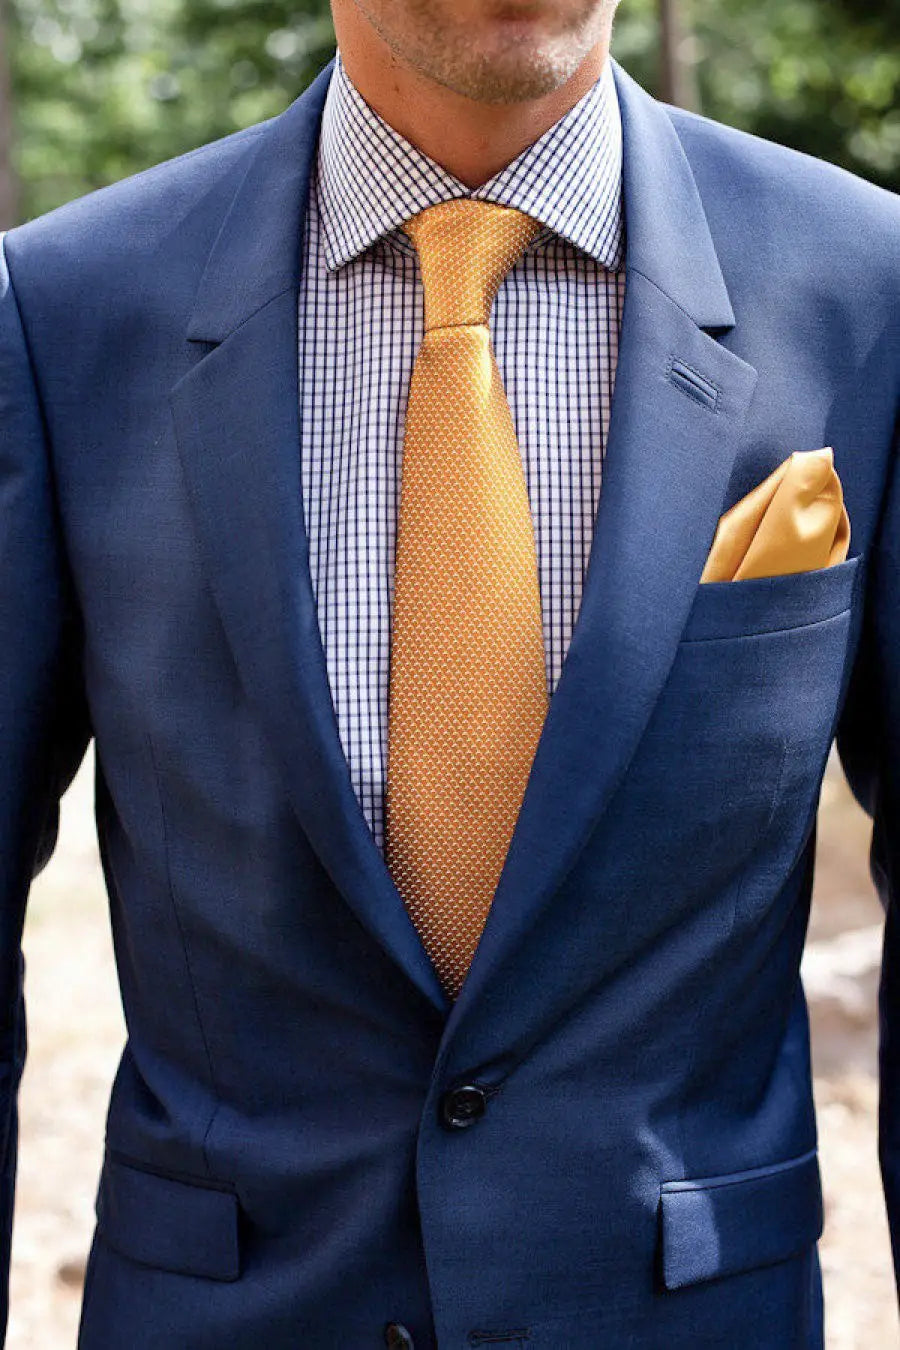 shirt and tie for navy blue suit,Up To OFF 65%